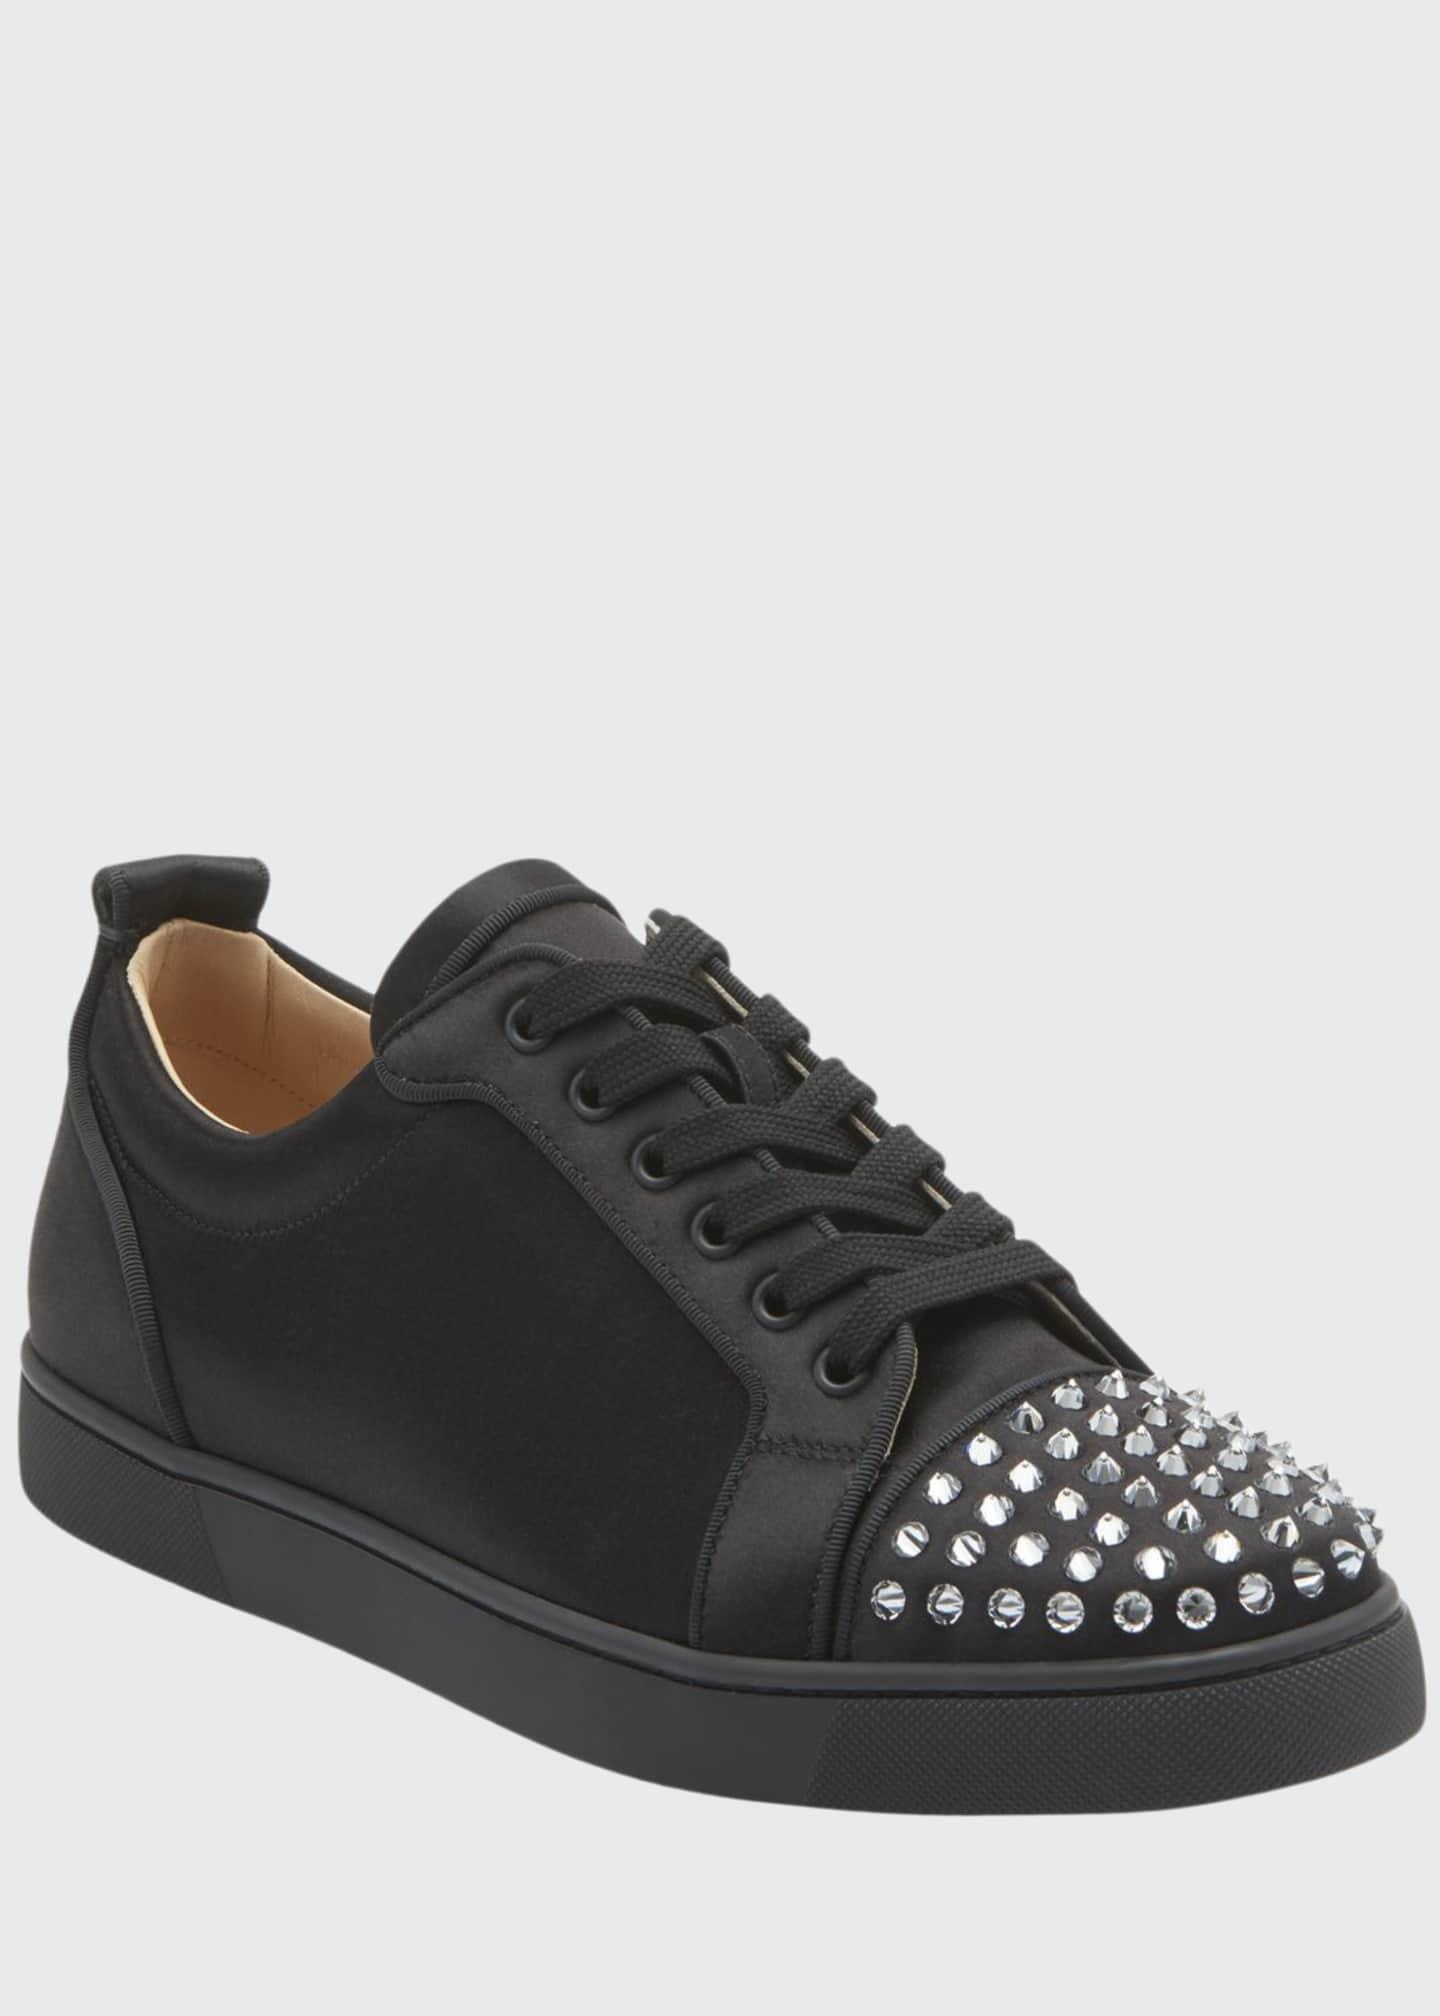 Louis Vuitton Red Bottoms Mens Low Top Sneakers | IQS Executive